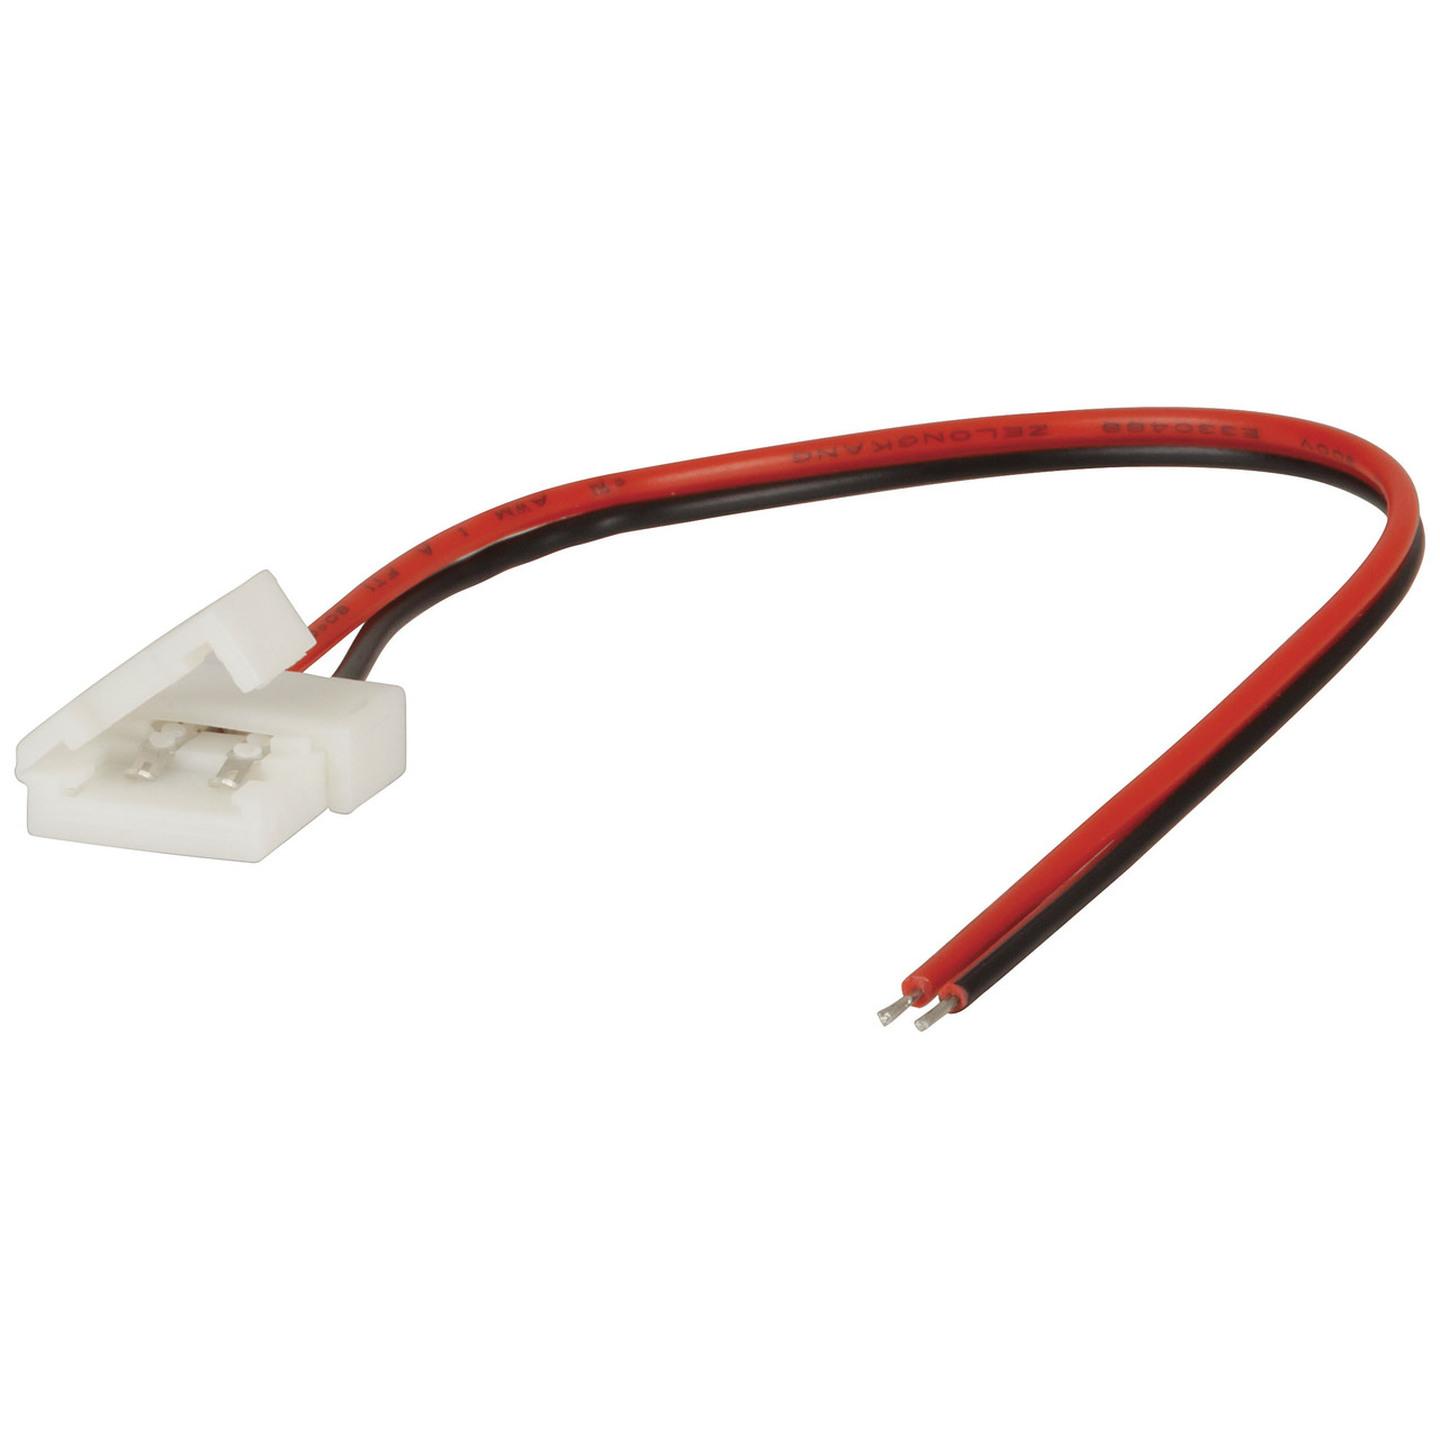 2 Pin LED Strip Connector to Bare Wire Lead